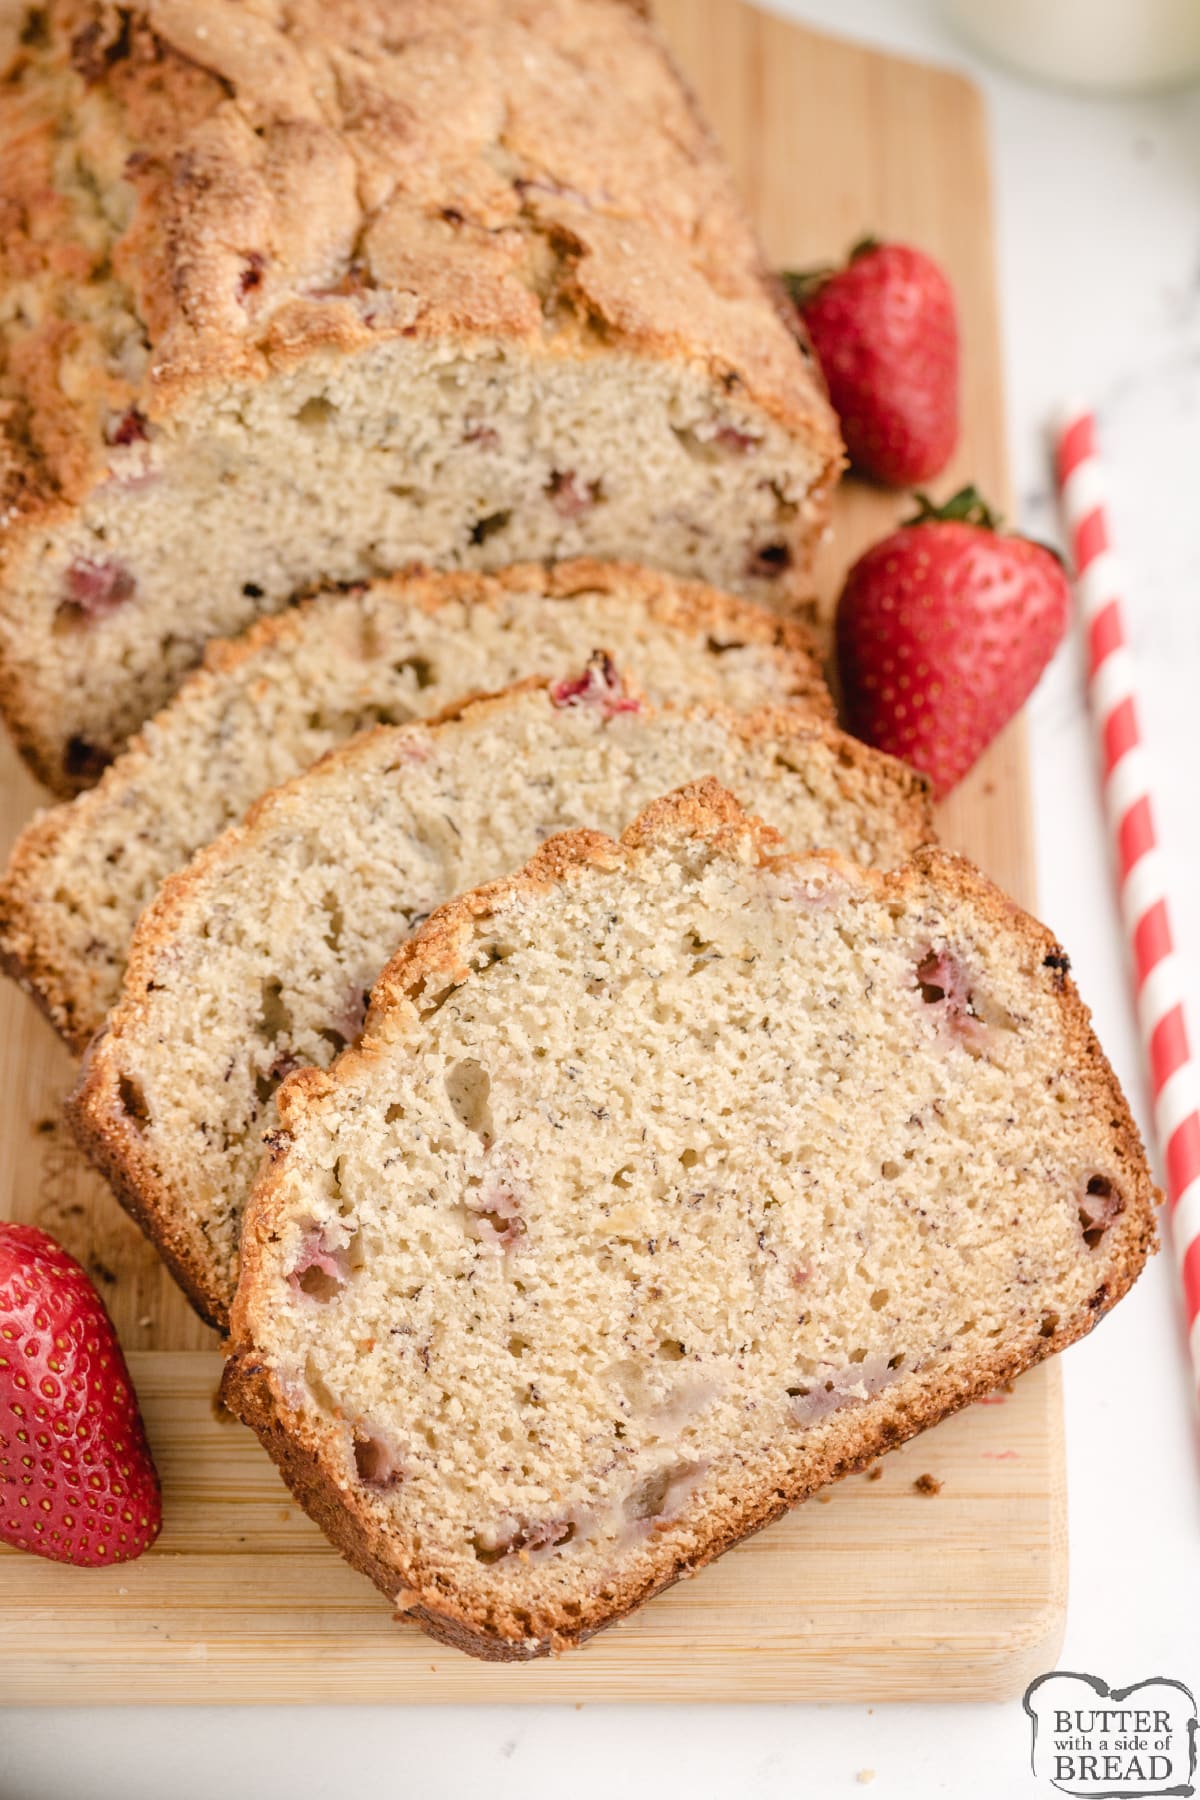 Sliced loaf of banana bread recipe made with strawberries